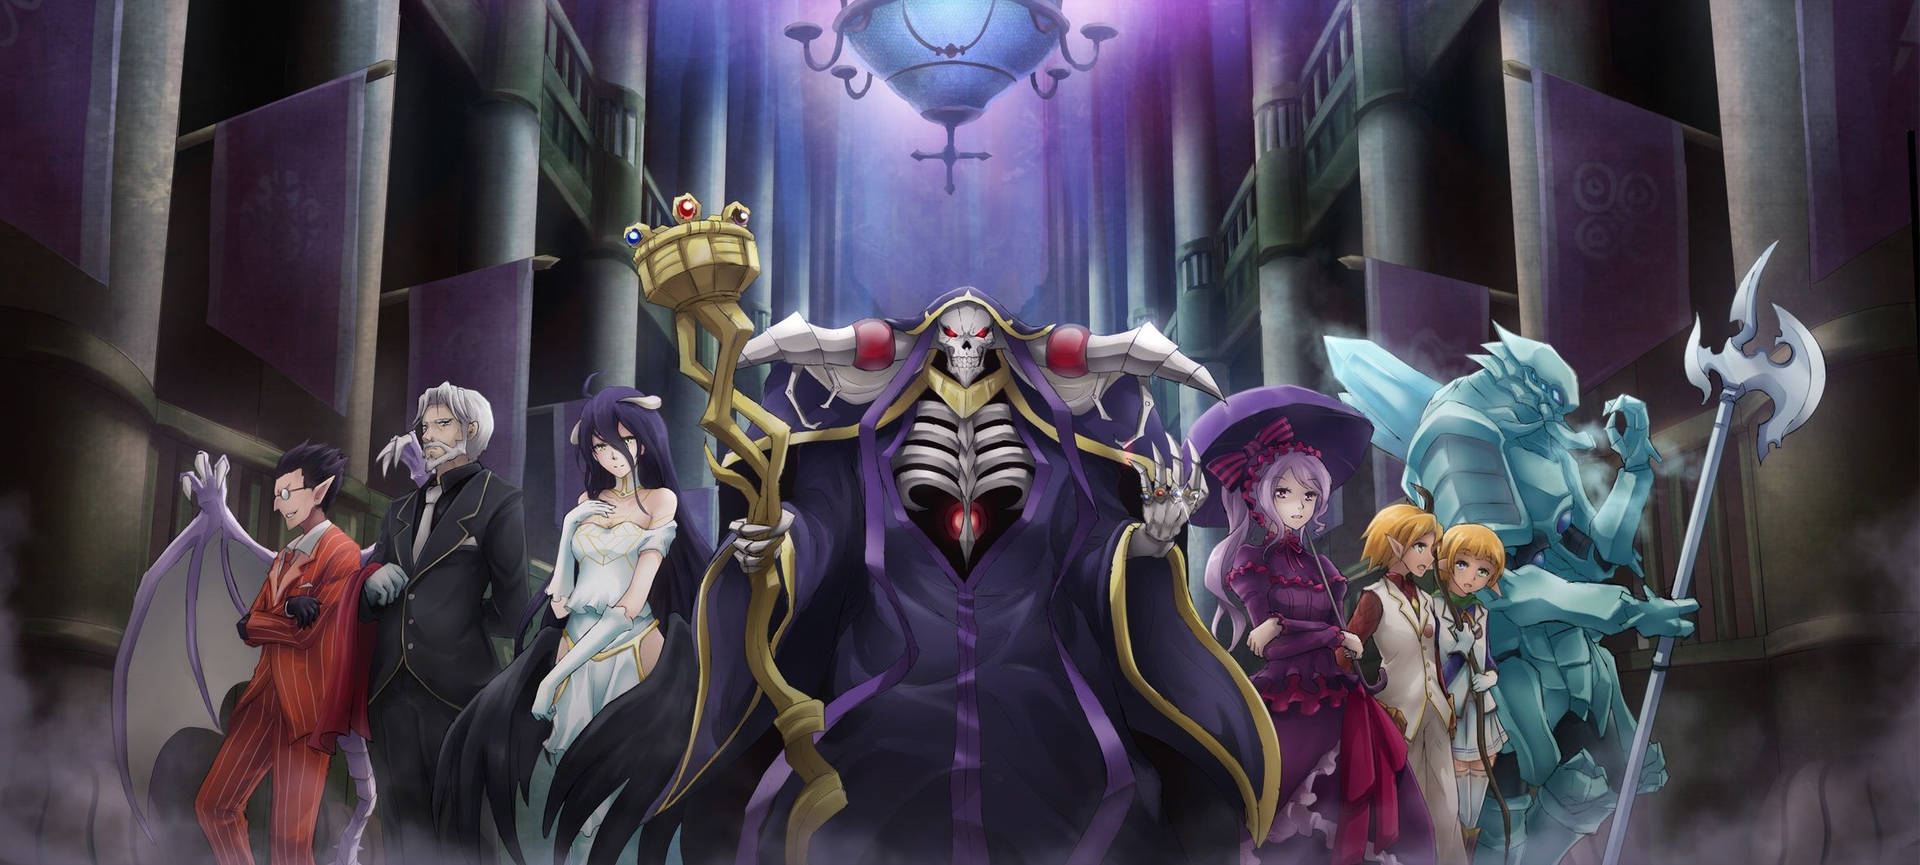 Overlord Background